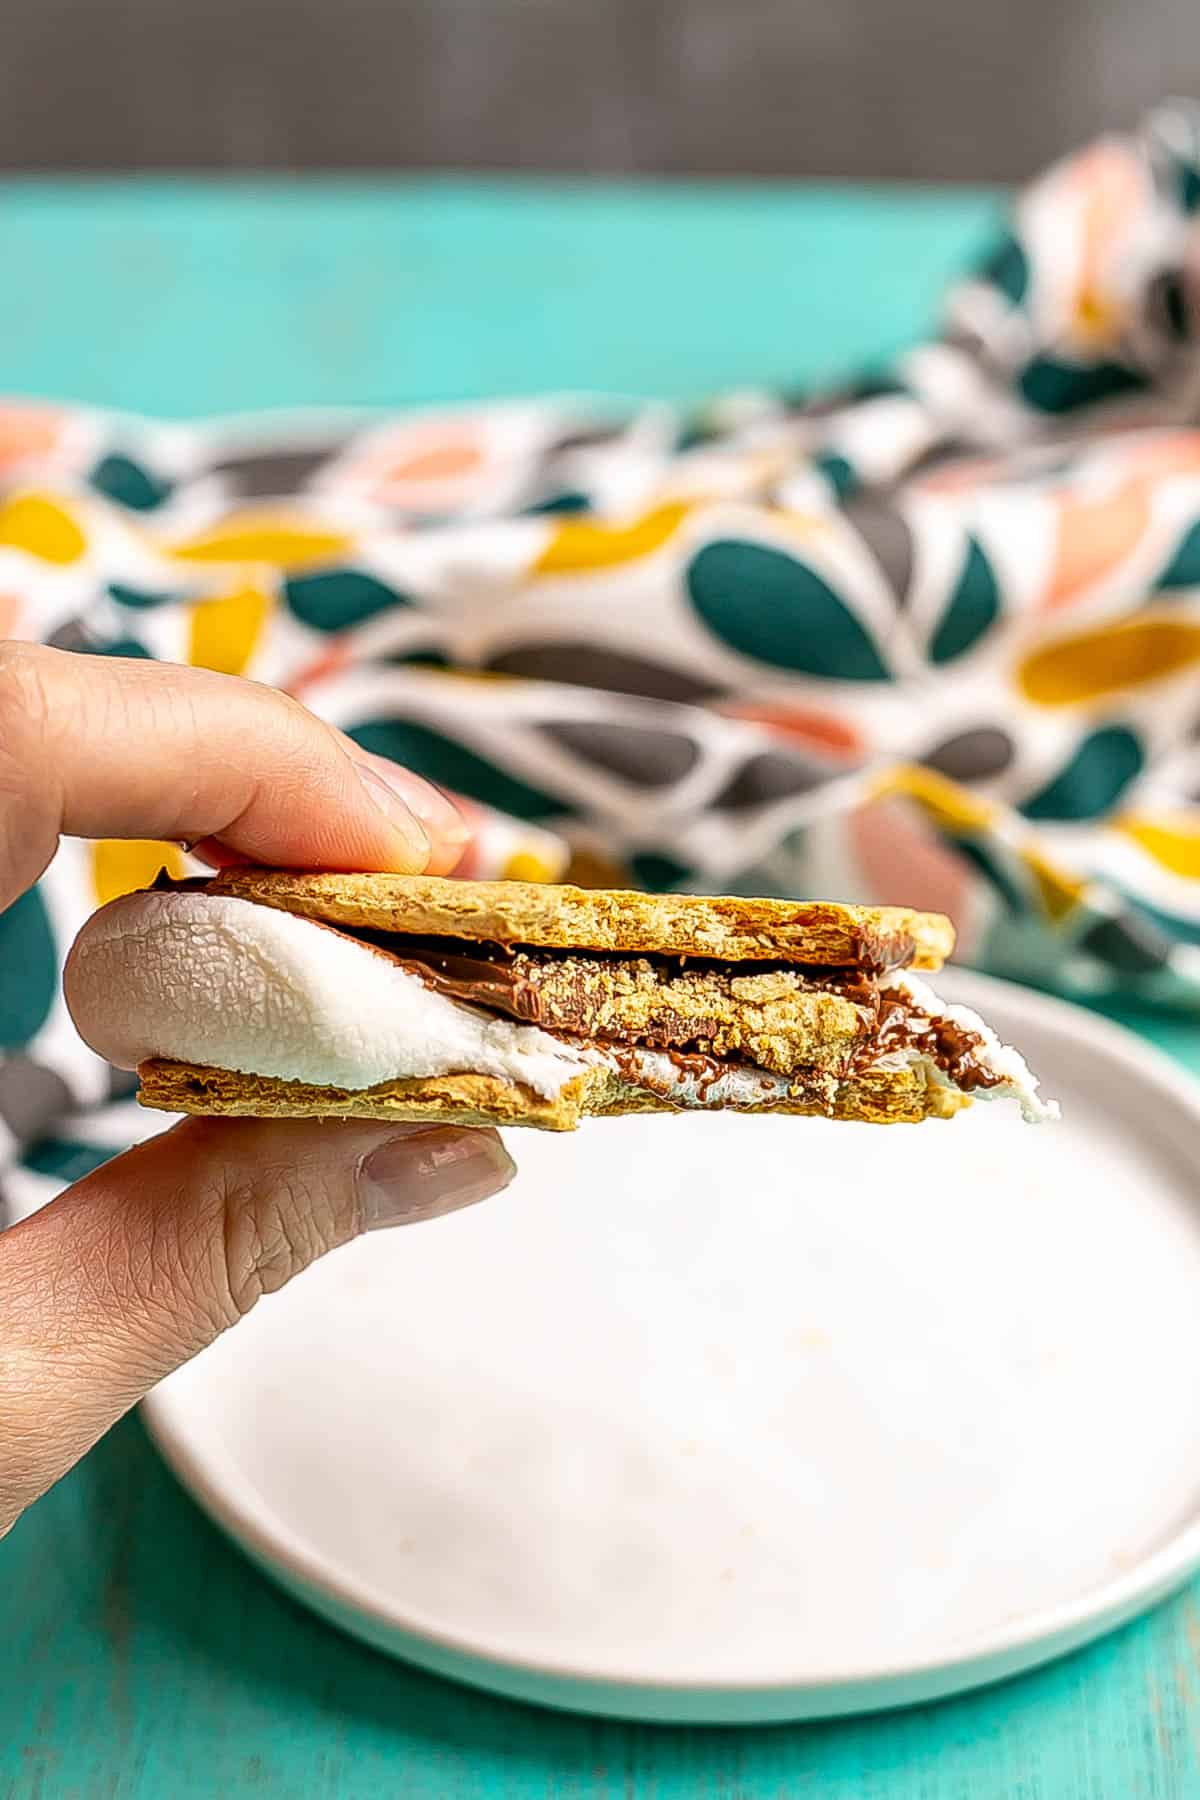 A hand holding s'mores with a bite taken out.